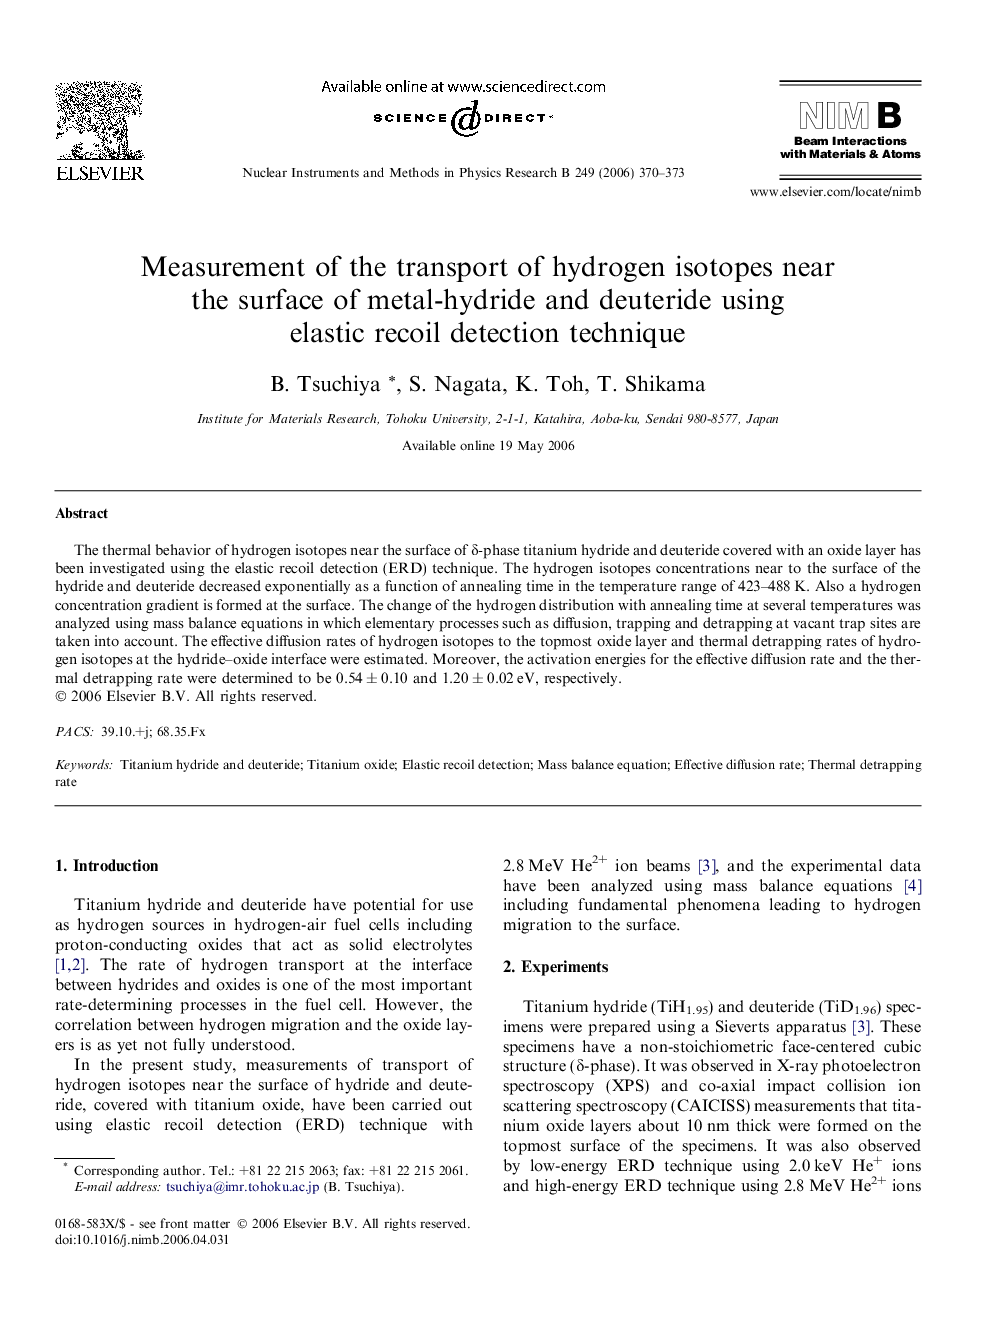 Measurement of the transport of hydrogen isotopes near the surface of metal-hydride and deuteride using elastic recoil detection technique